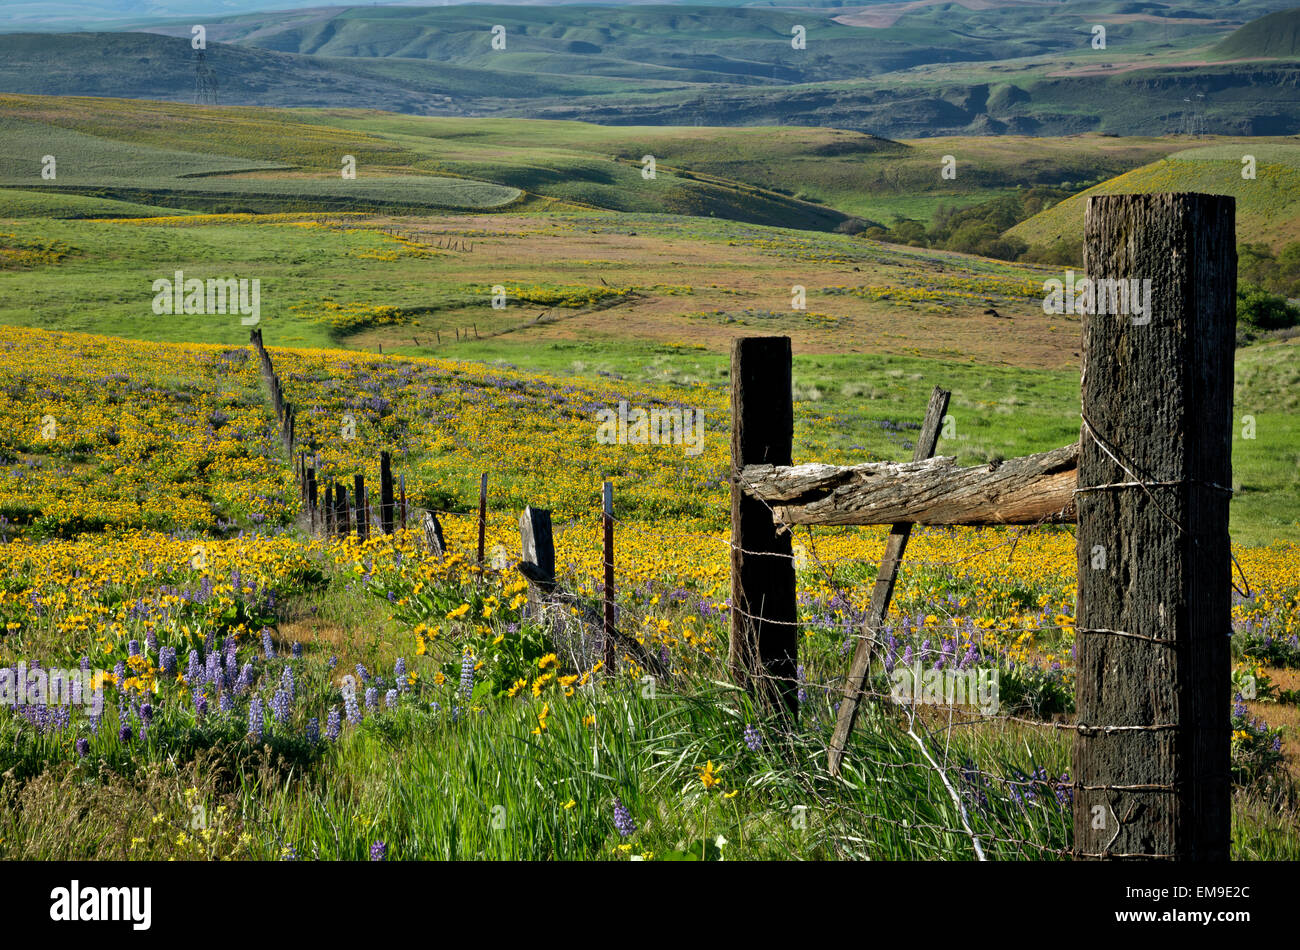 WA10367-00...WASHINGTON - Fence and wildflowers in the Dalles Mountain Ranch area of Columbia Hills State Park. Stock Photo